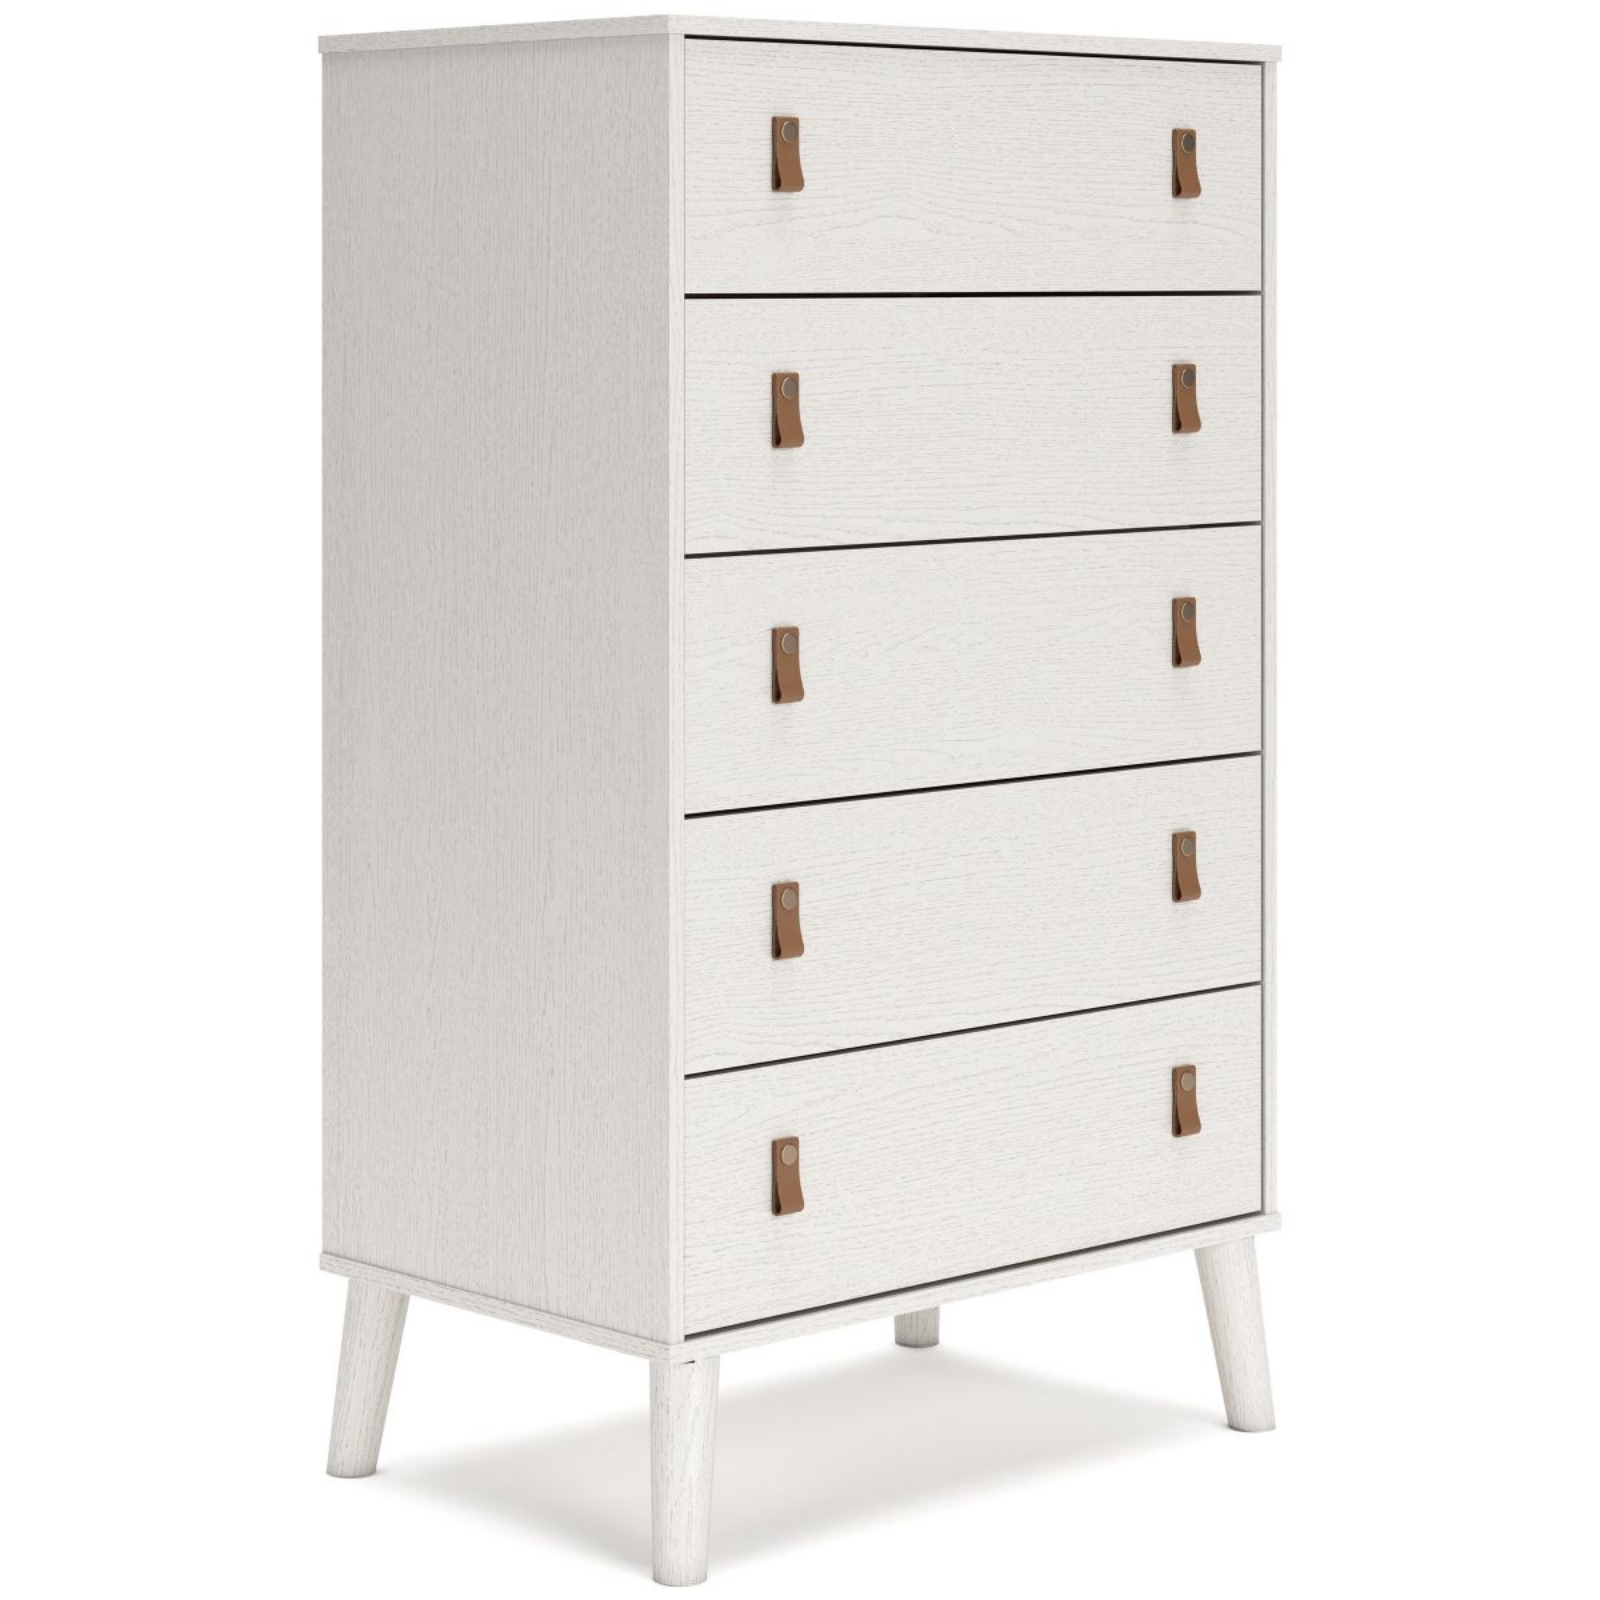 Picture of Aprilyn Chest of Drawers